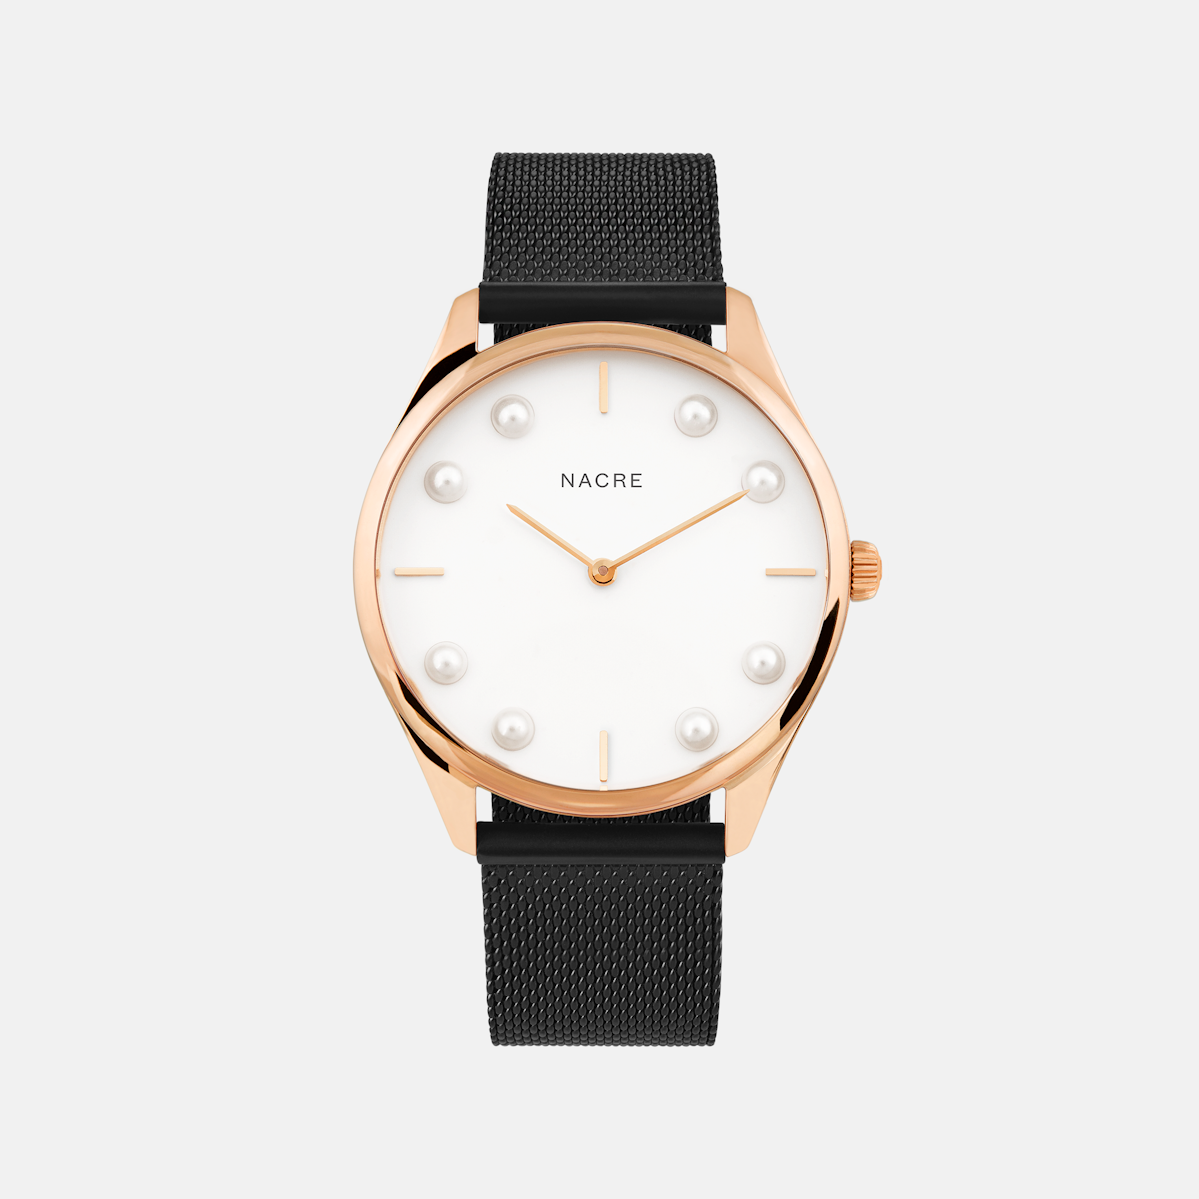 Lune 8 - Rose Gold and White - Saddle Leather